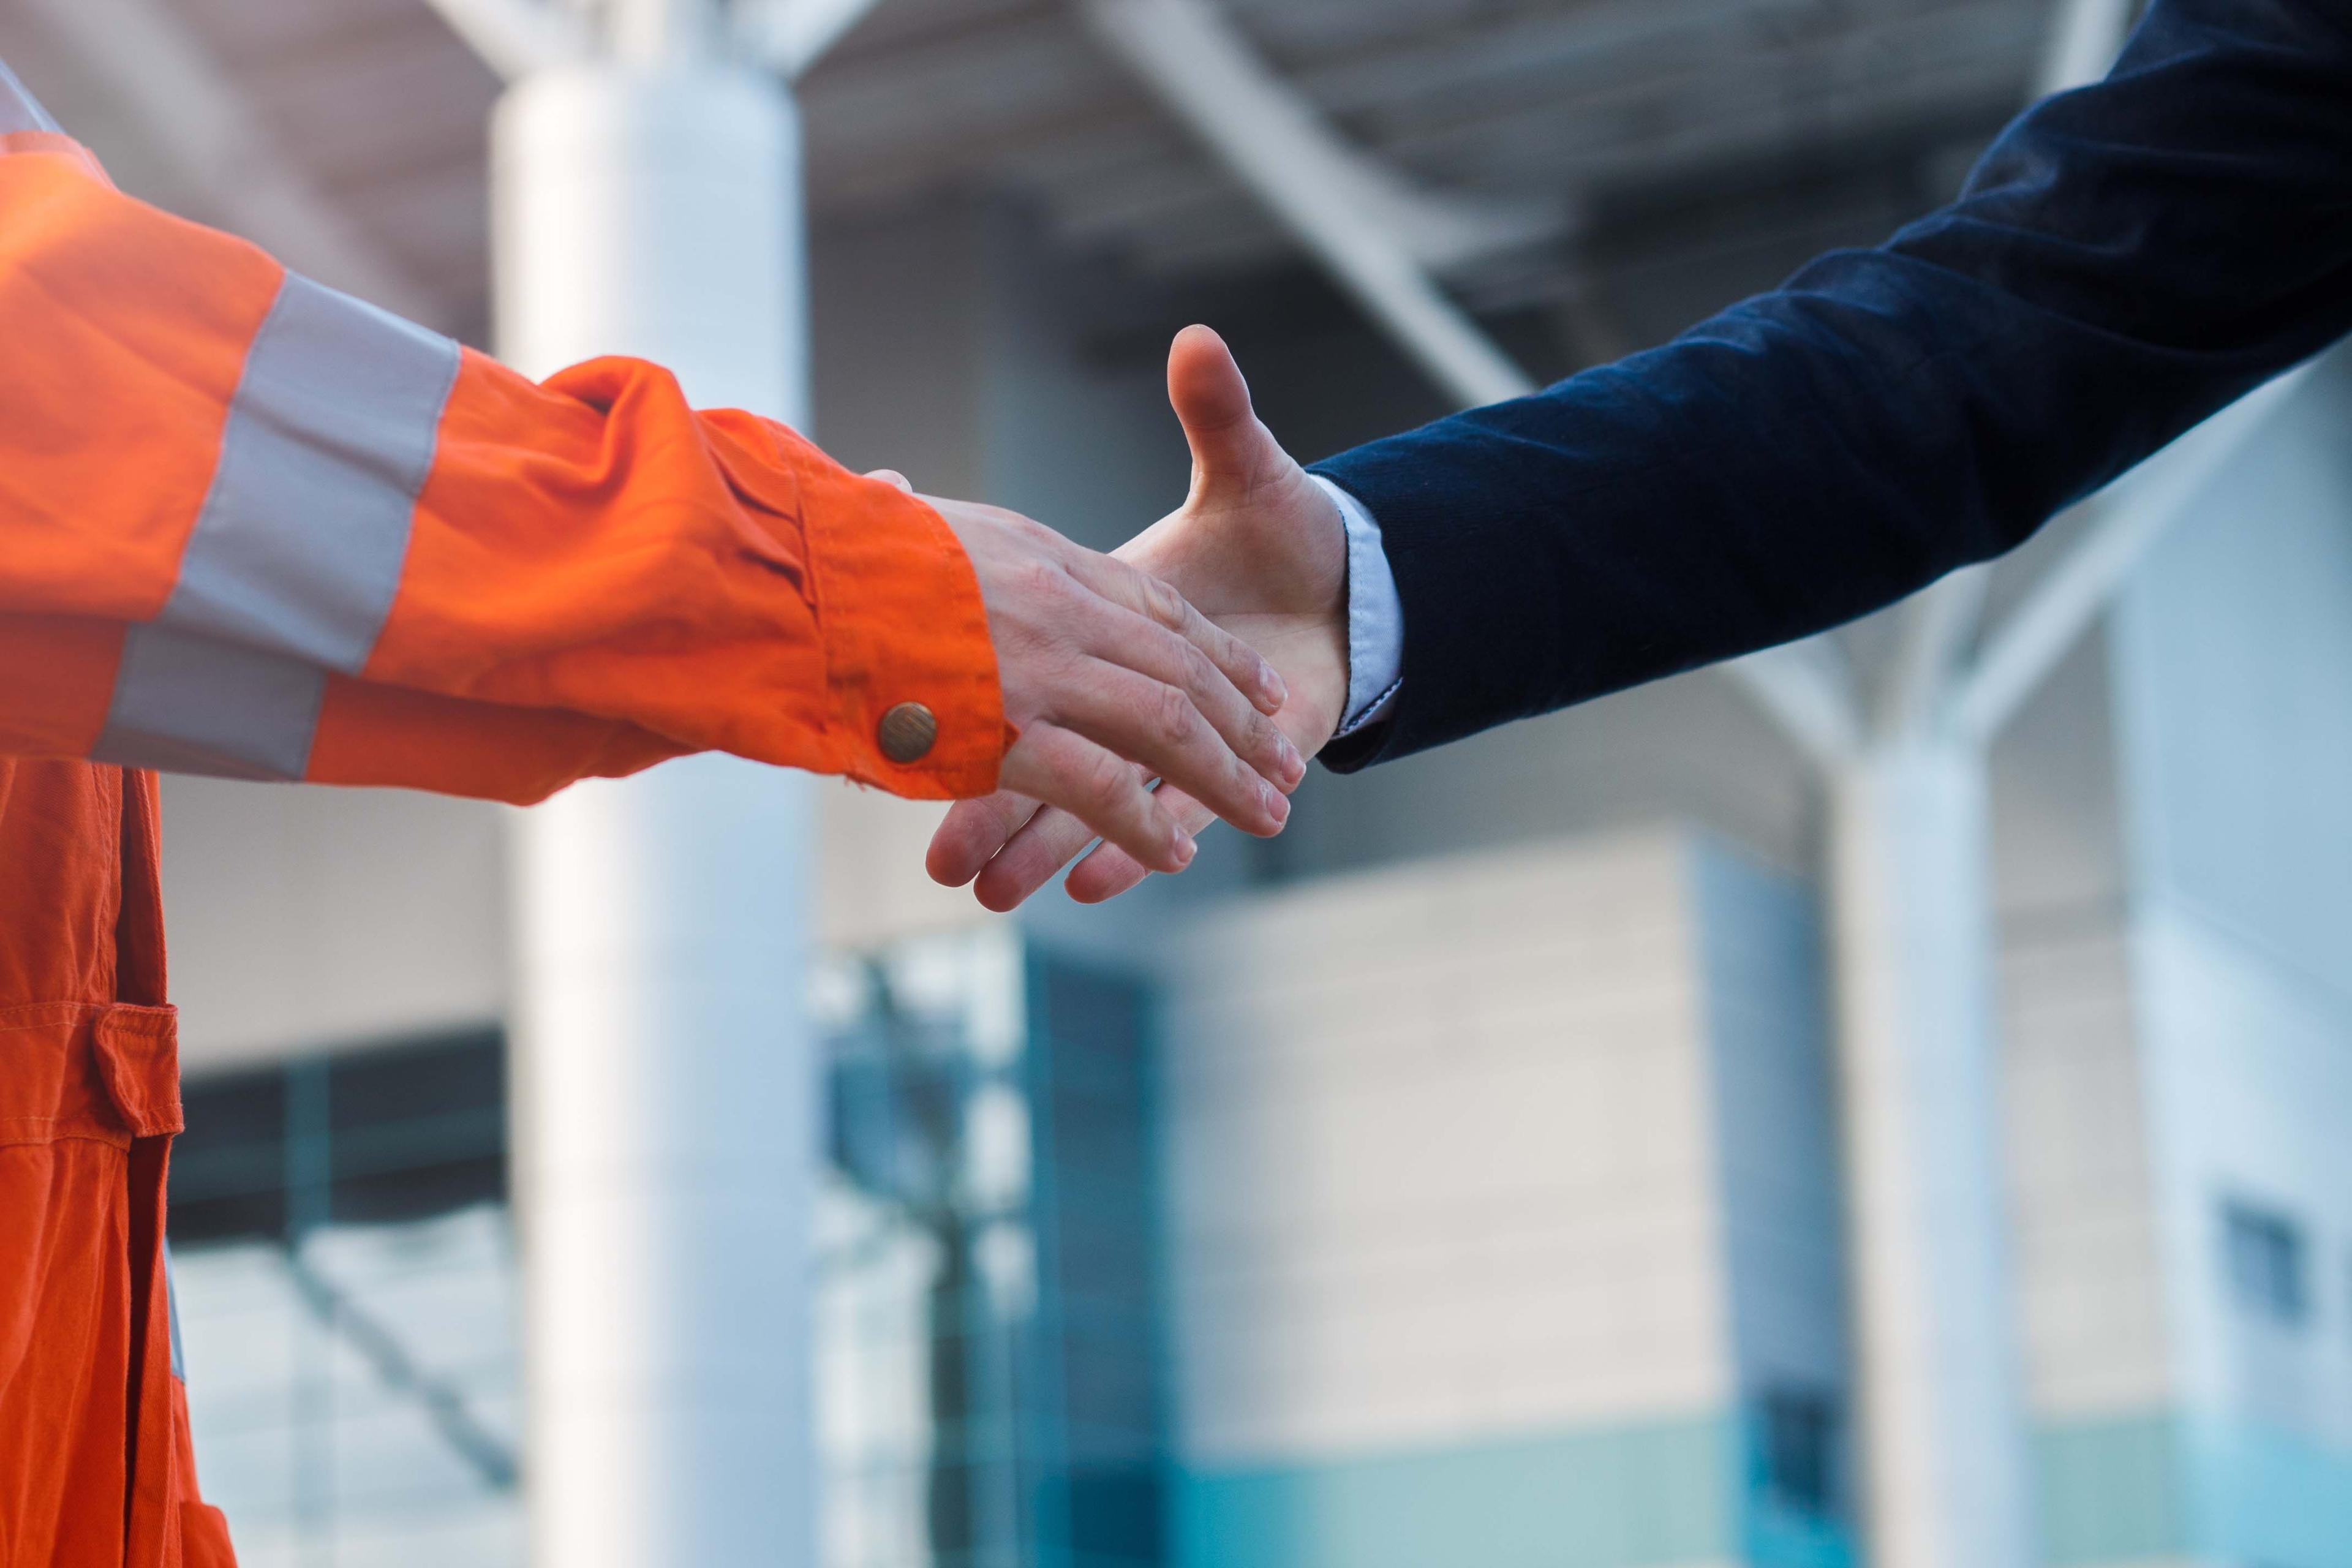 A mine worker wearing an orange high visibility shirt and an office worker wearing business attire shaking hands.